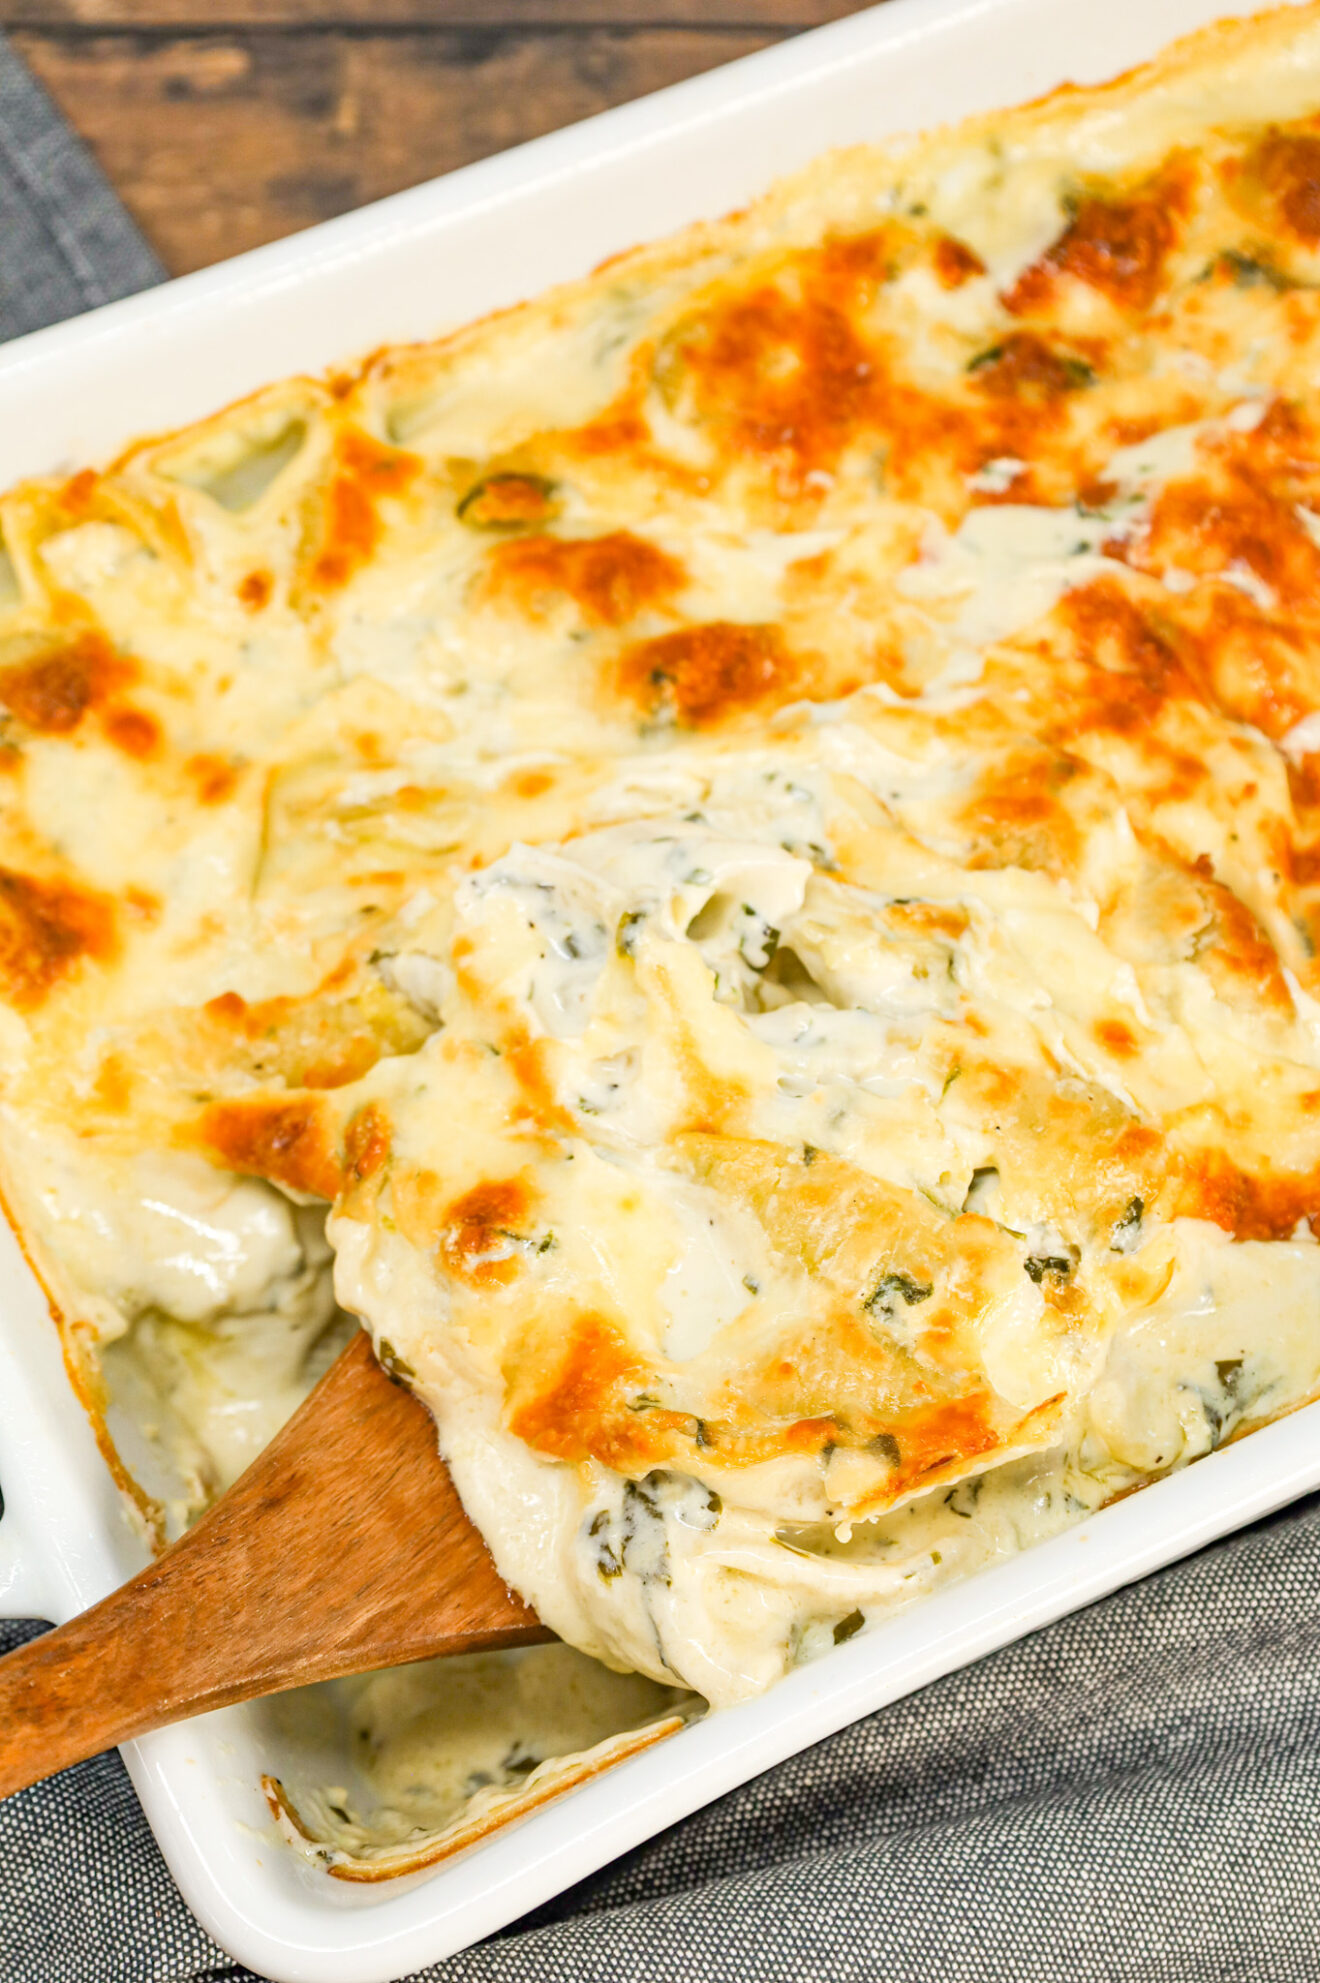 Spinach Artichoke Pasta Bake - THIS IS NOT DIET FOOD